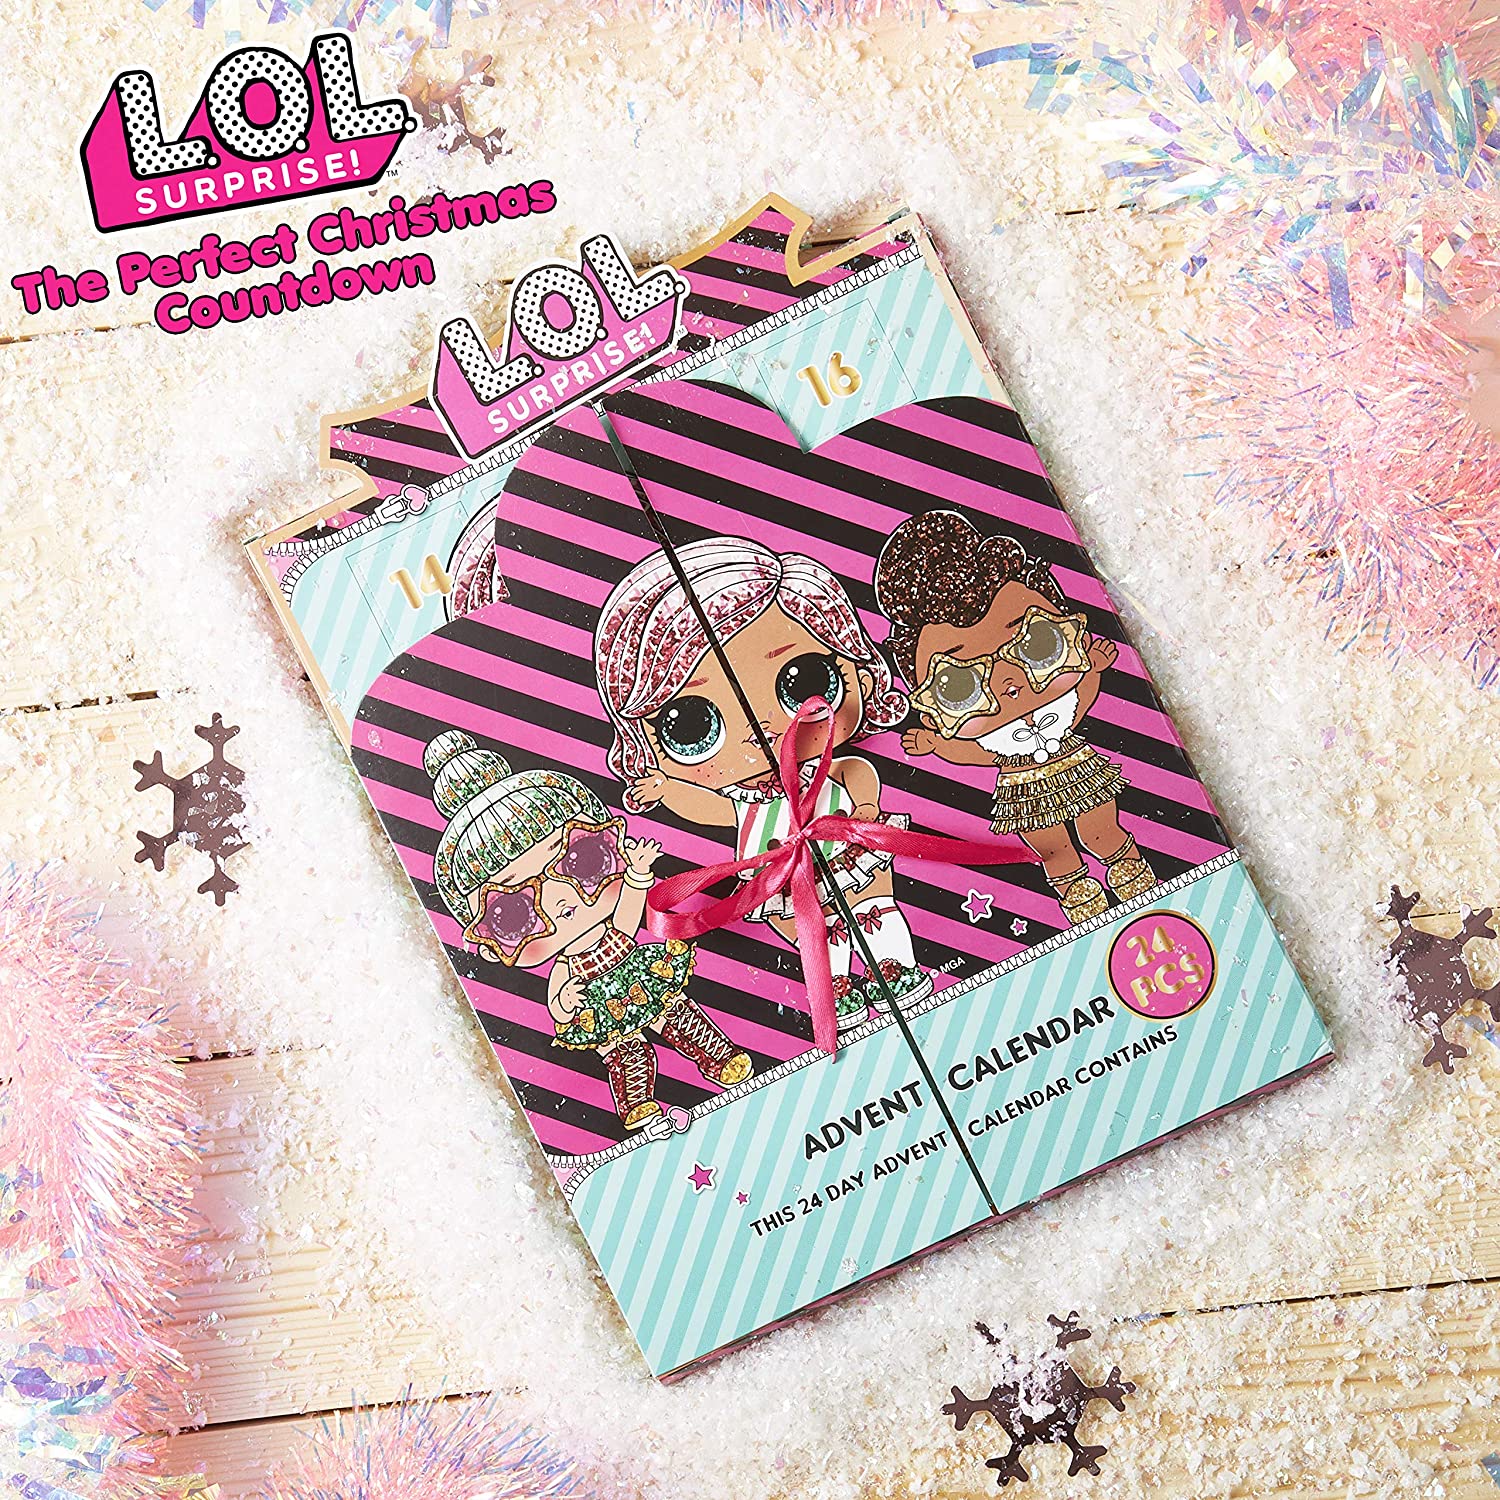 LOL Surprise Advent Calendar 2020 with charms - YouLoveIt.com